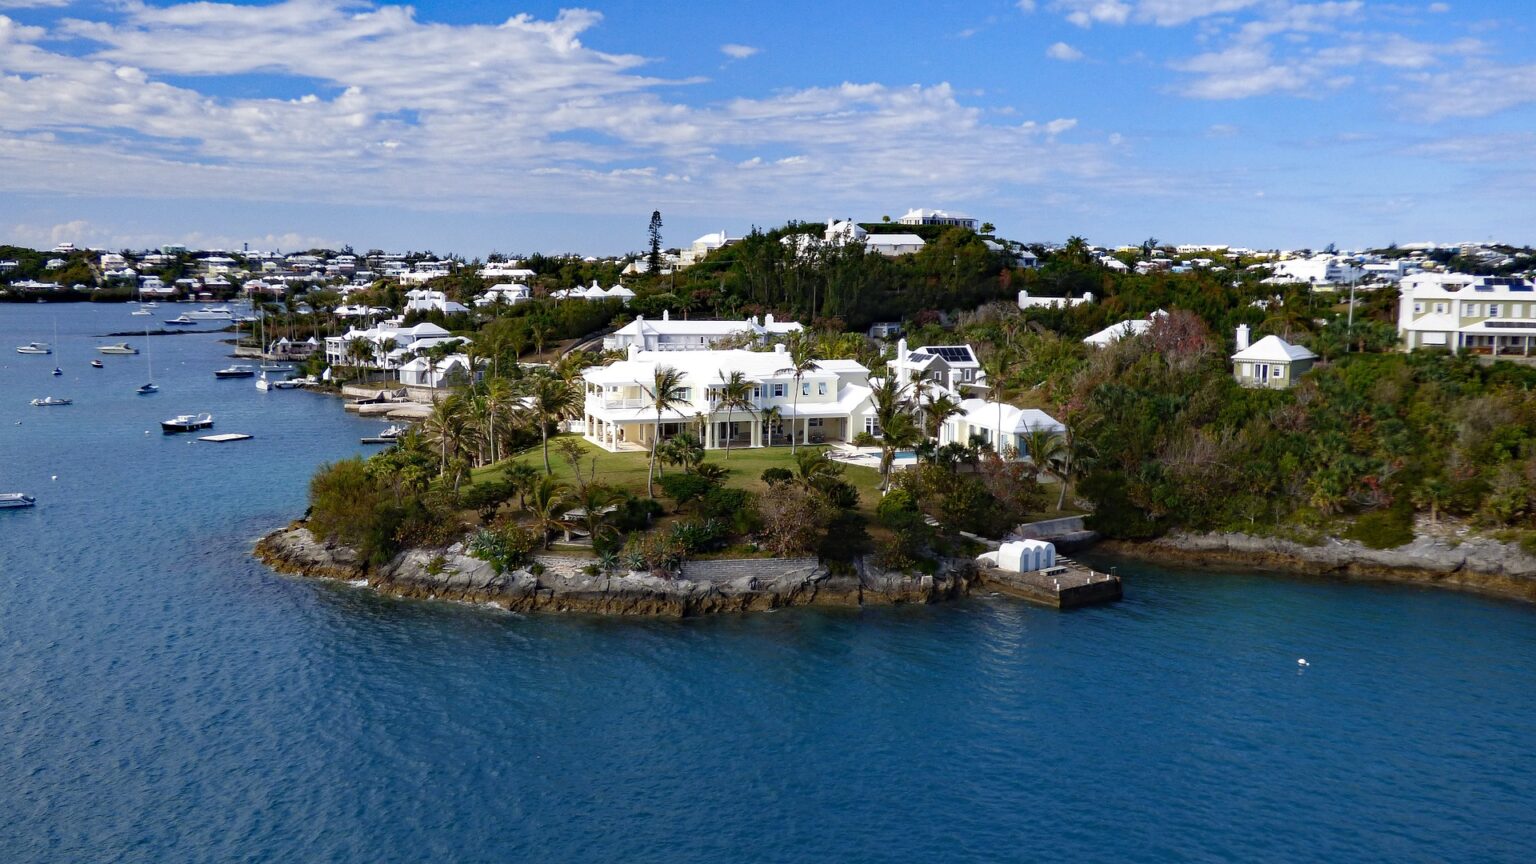 Bermuda Houses White Roofs: Embracing the Enchanting Architecture